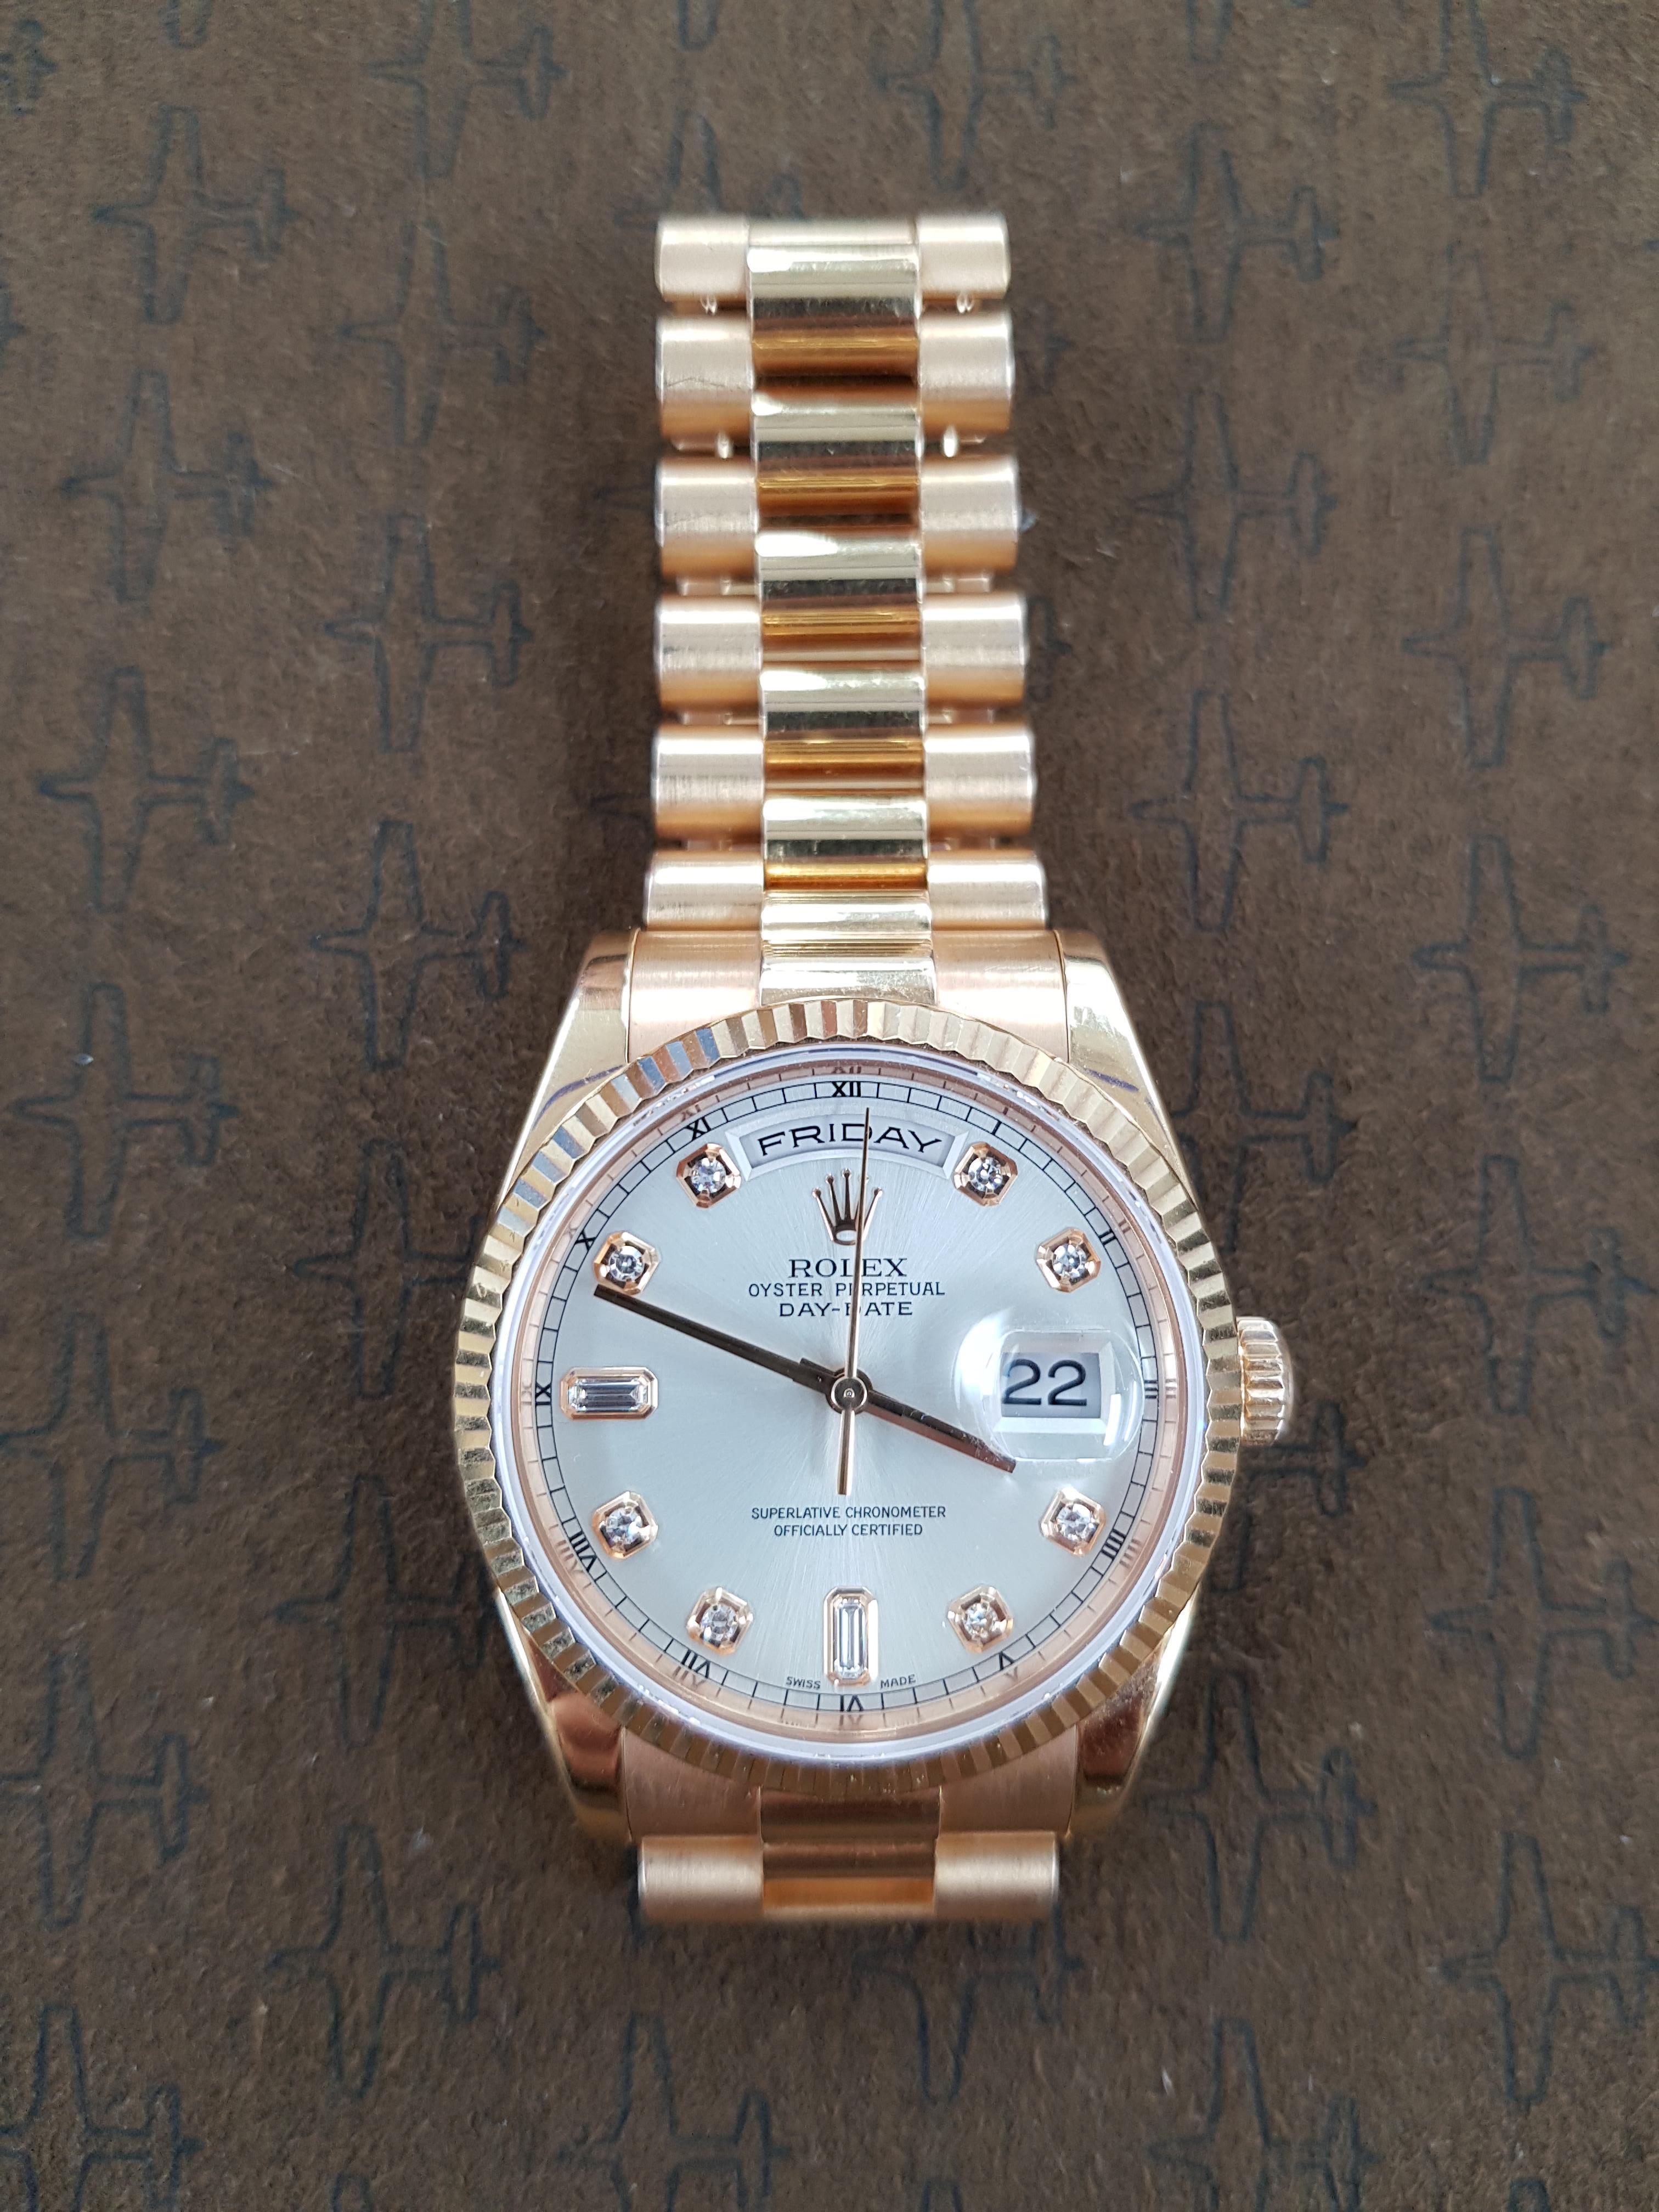 This 36mm dial, rose gold, Rolex Day Date comes with full Rolex certification.  It has been fitted with new (Rolex manufactured) links and it contains a solid clasp.